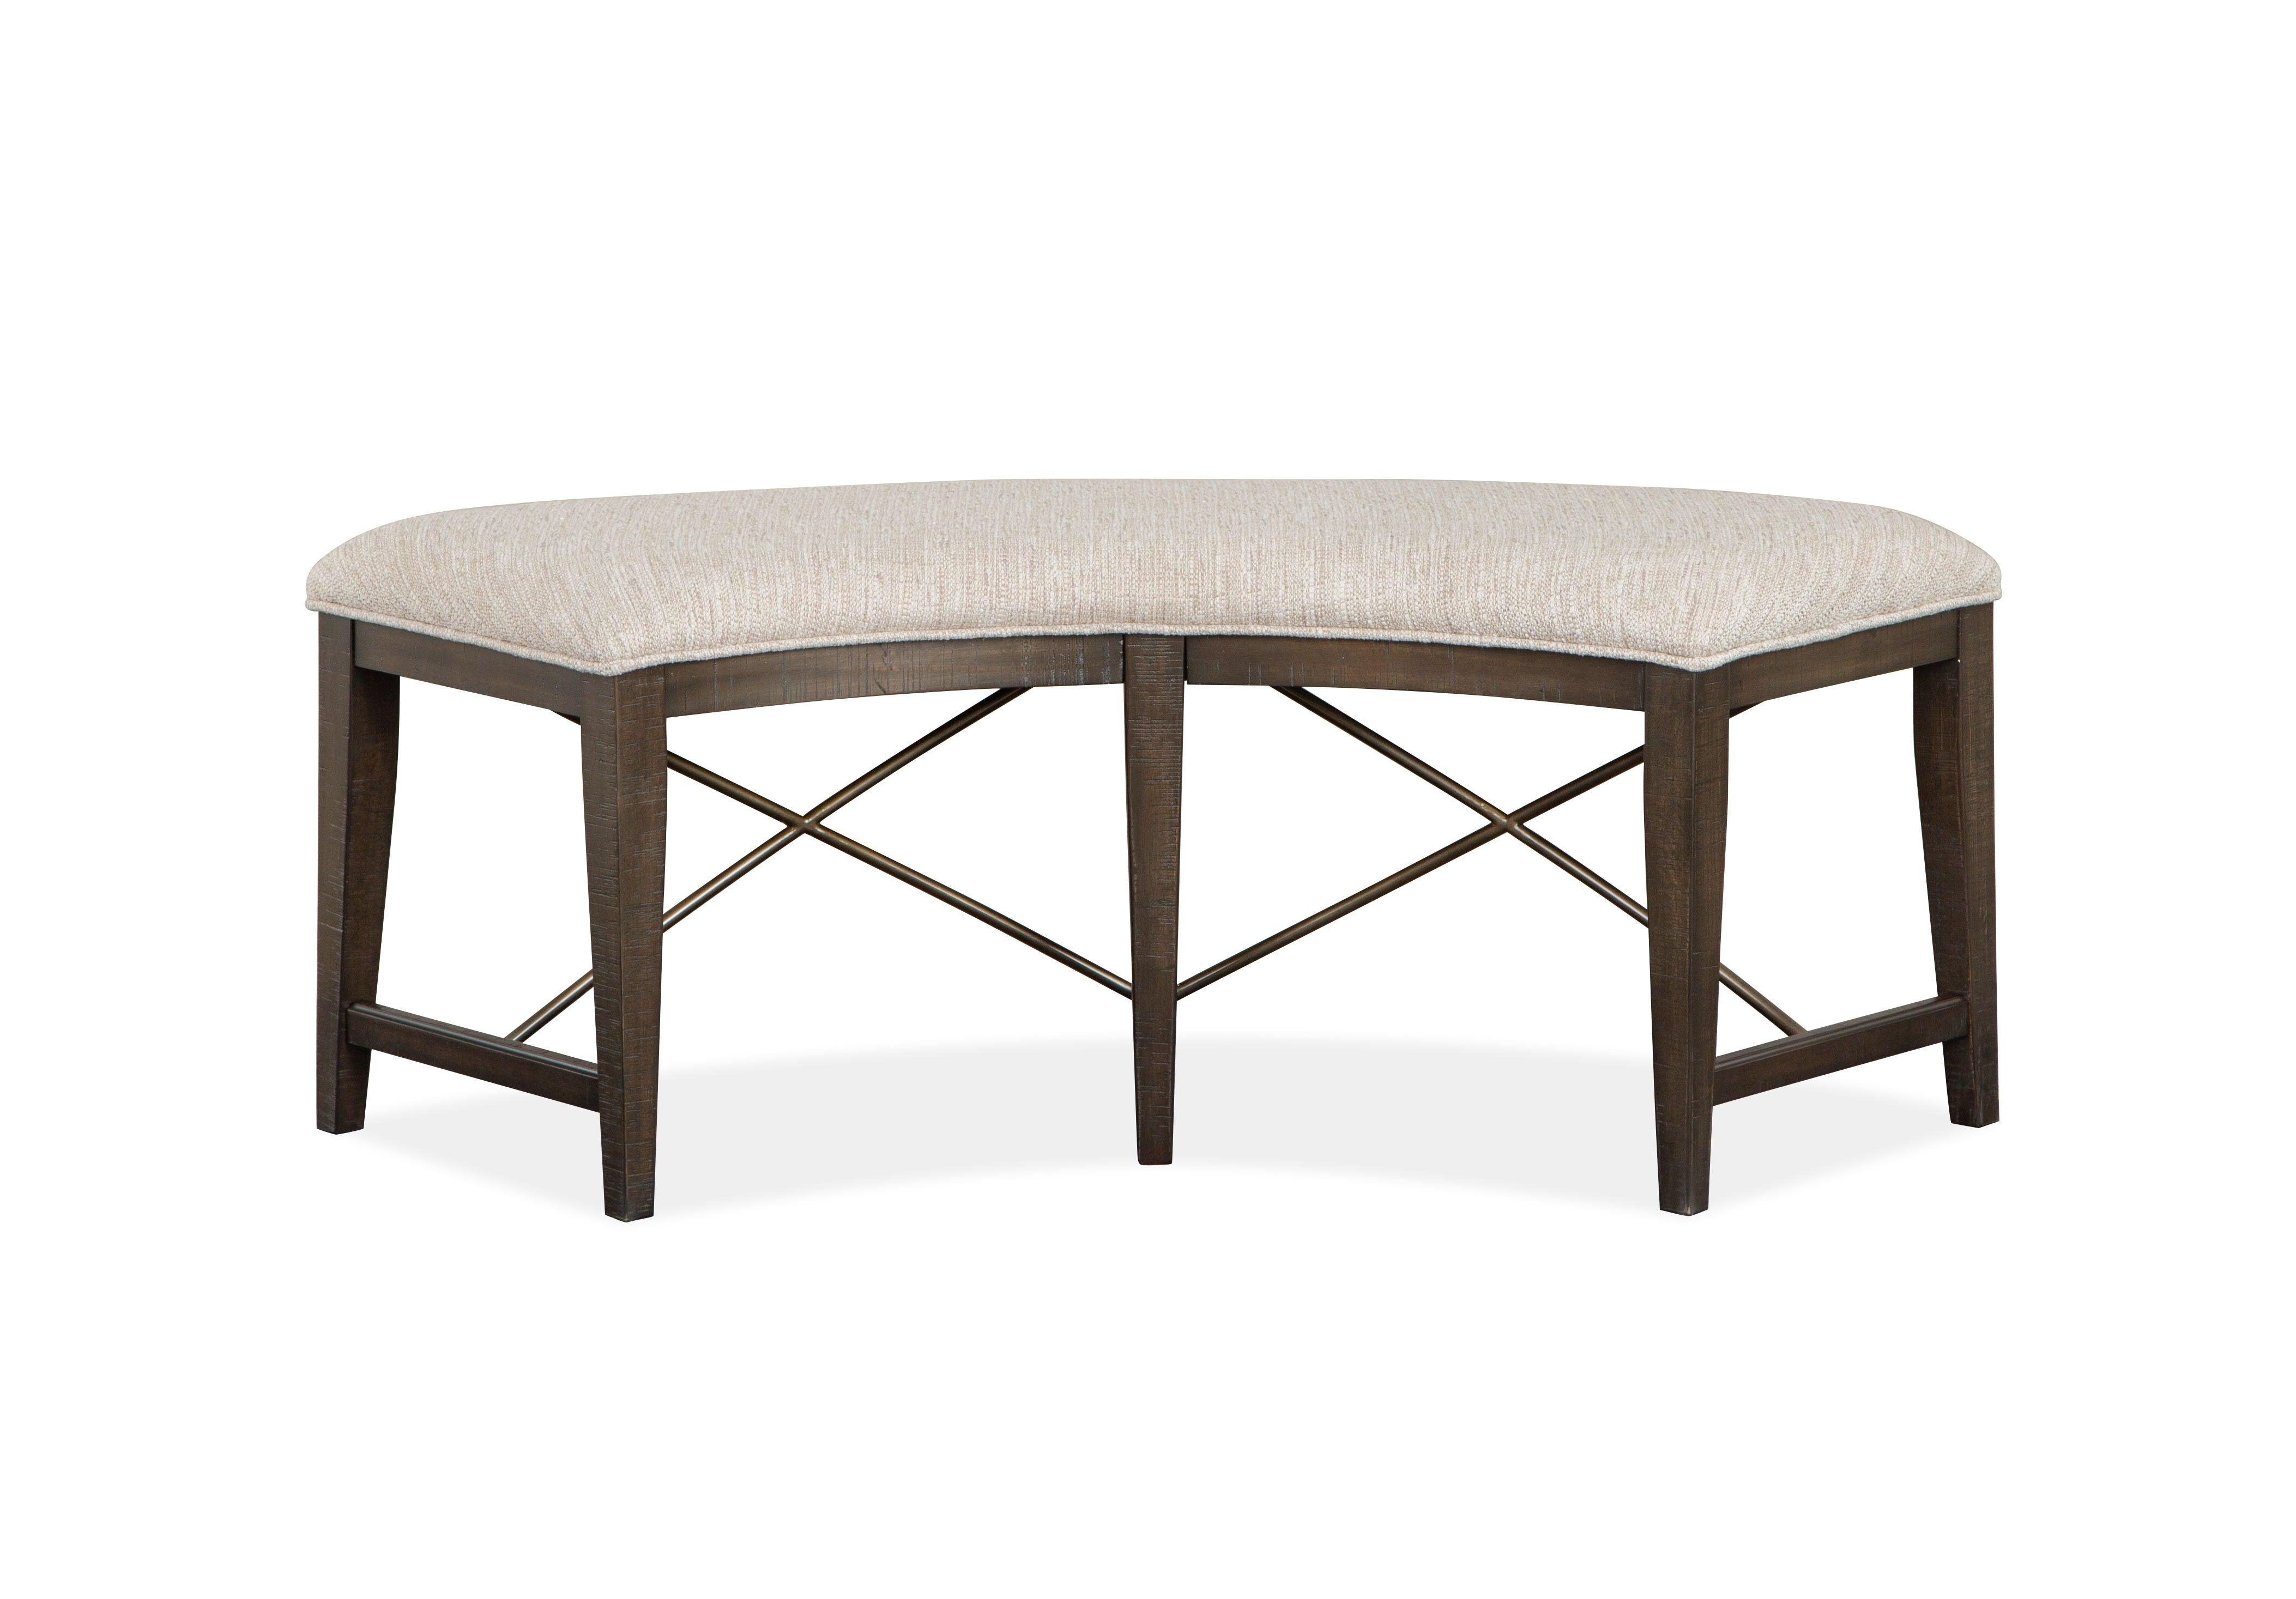 Magnussen Furniture - Westley Falls - Curved Bench With Upholstered Seat - Graphite - 5th Avenue Furniture